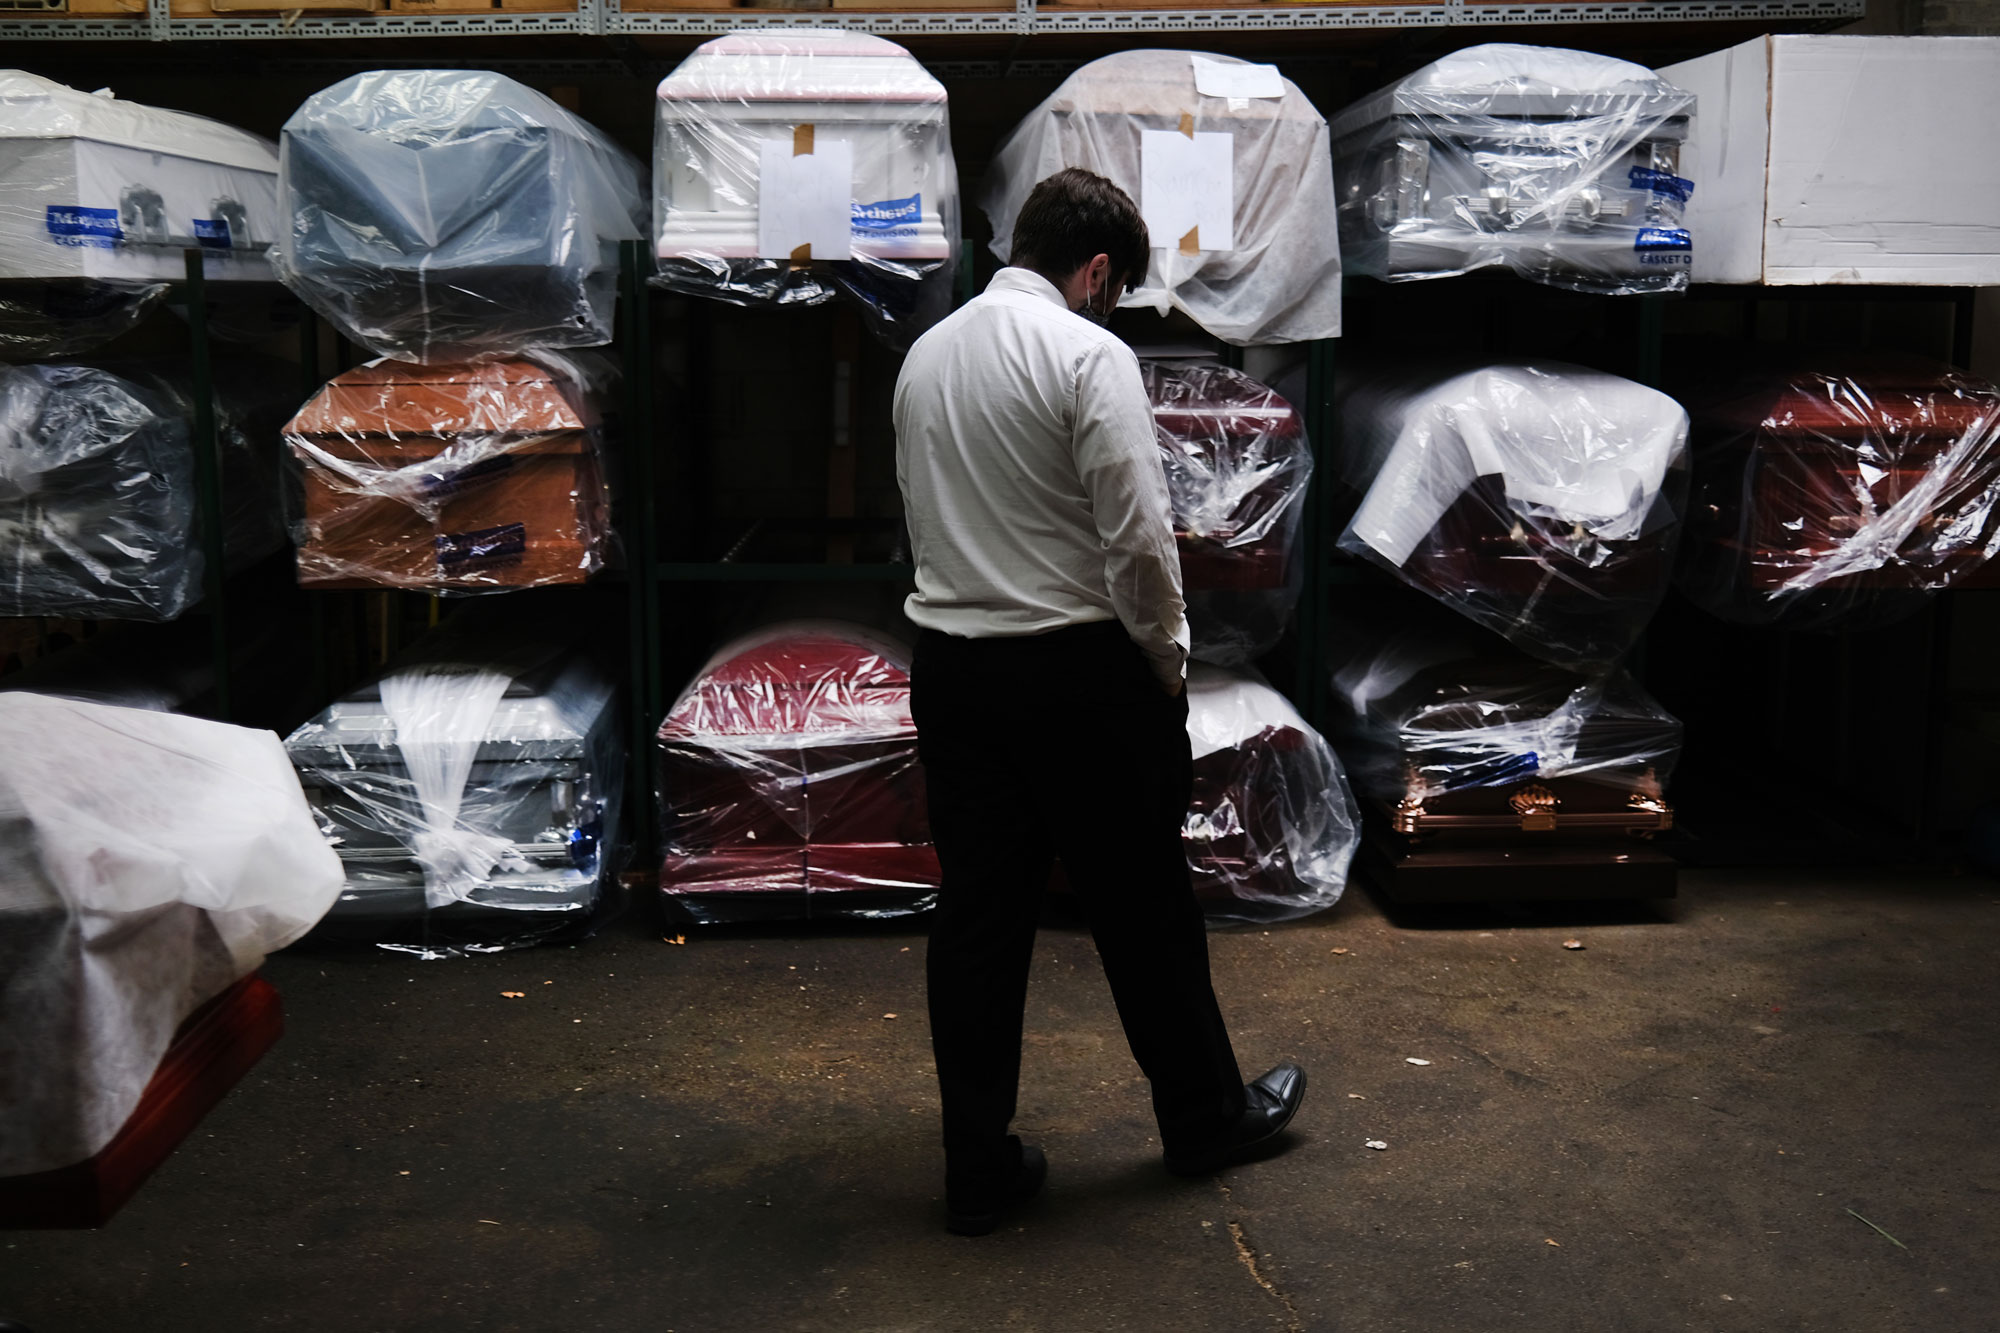 James Harvey tends tends to the inventory of pre-sold caskets at a funeral home on April 29, in New York City. 